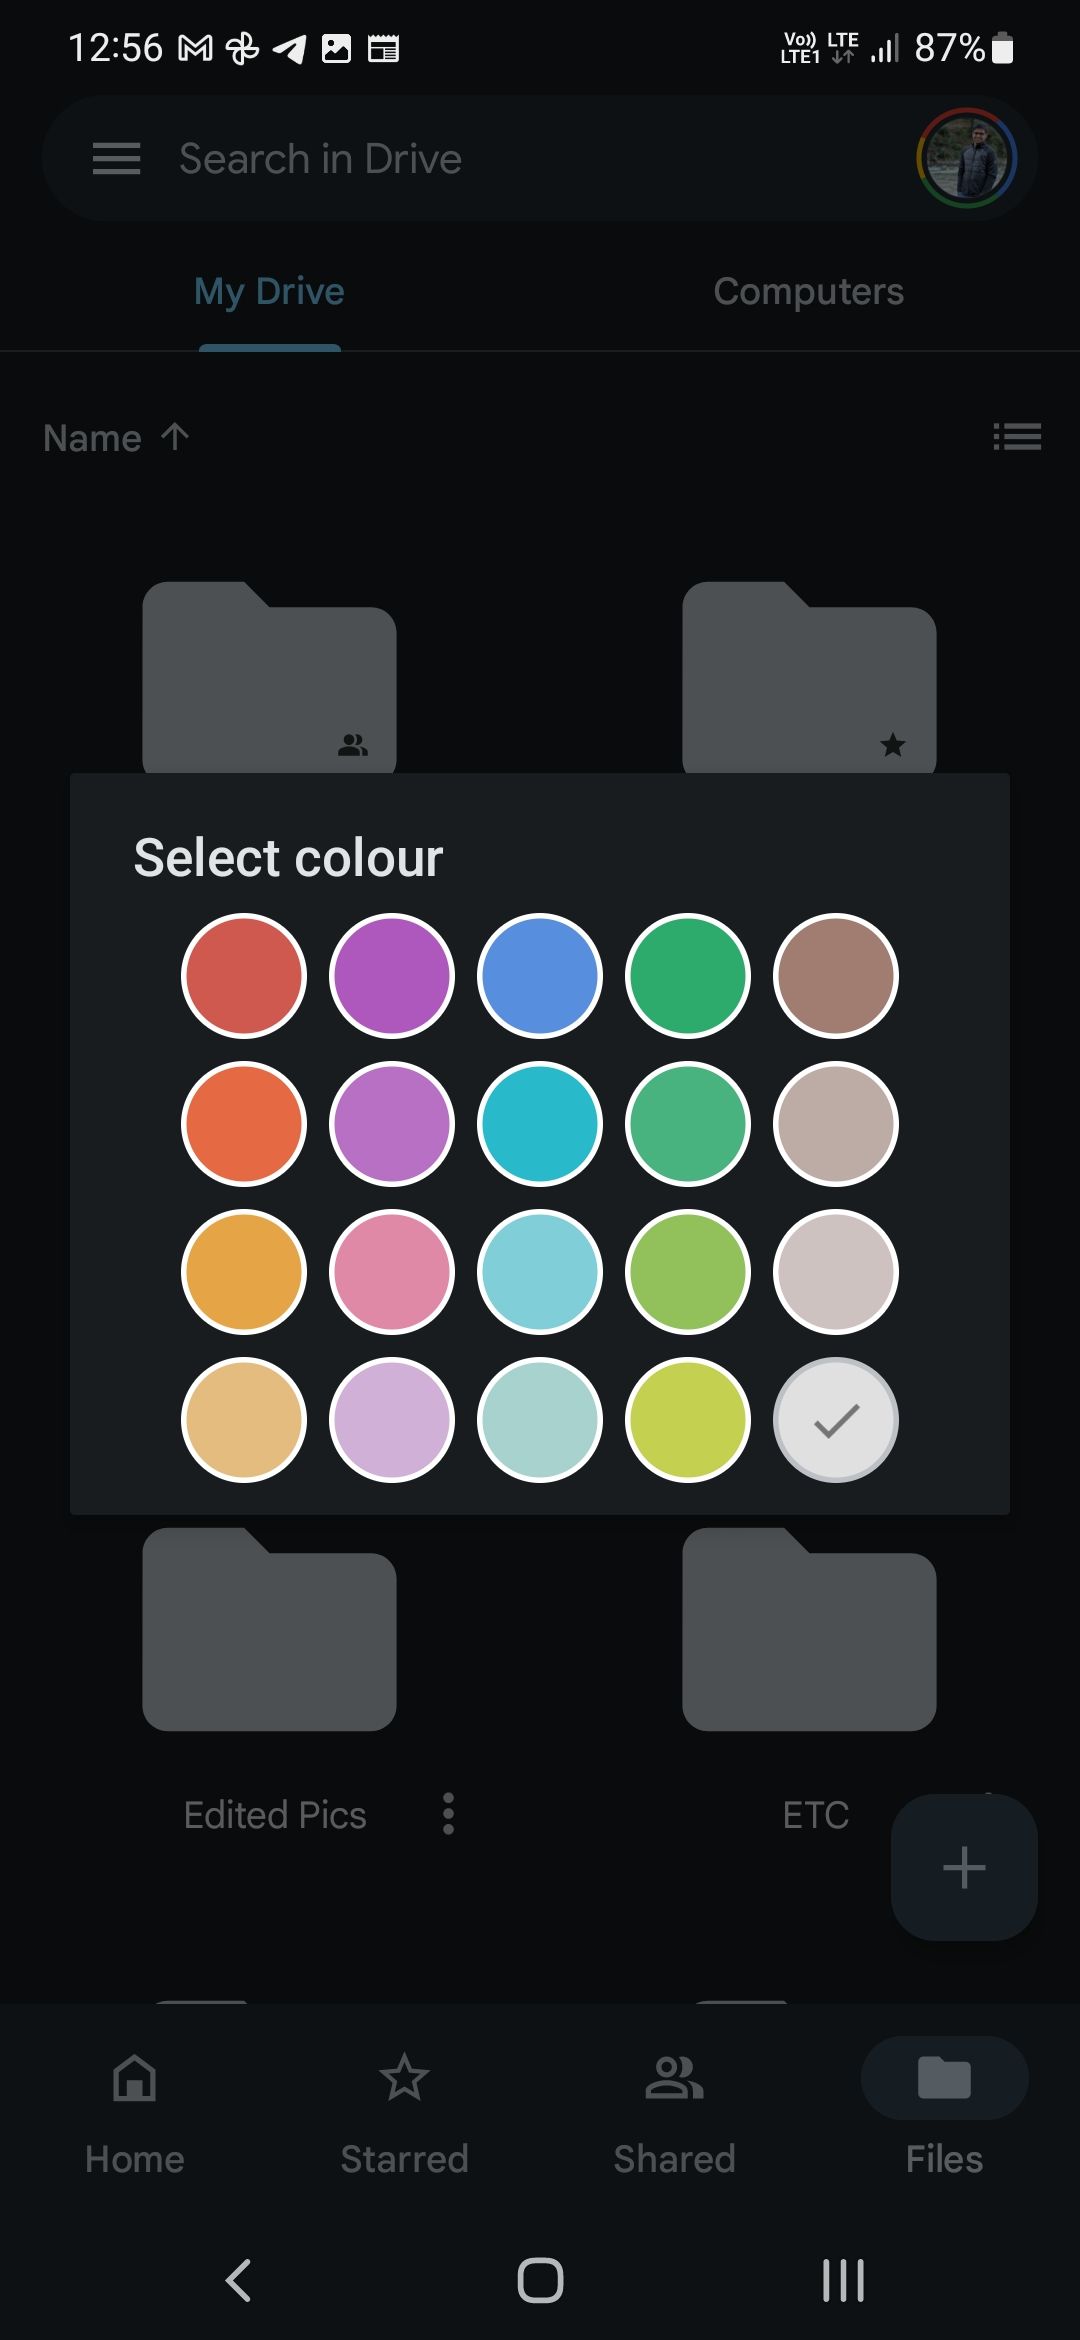 A screenshot depicting Google Drive's color picker window, used for choosing folder colors. The window shows various color options, with a neutral white color currently highlighted as the selected choice for a folder.